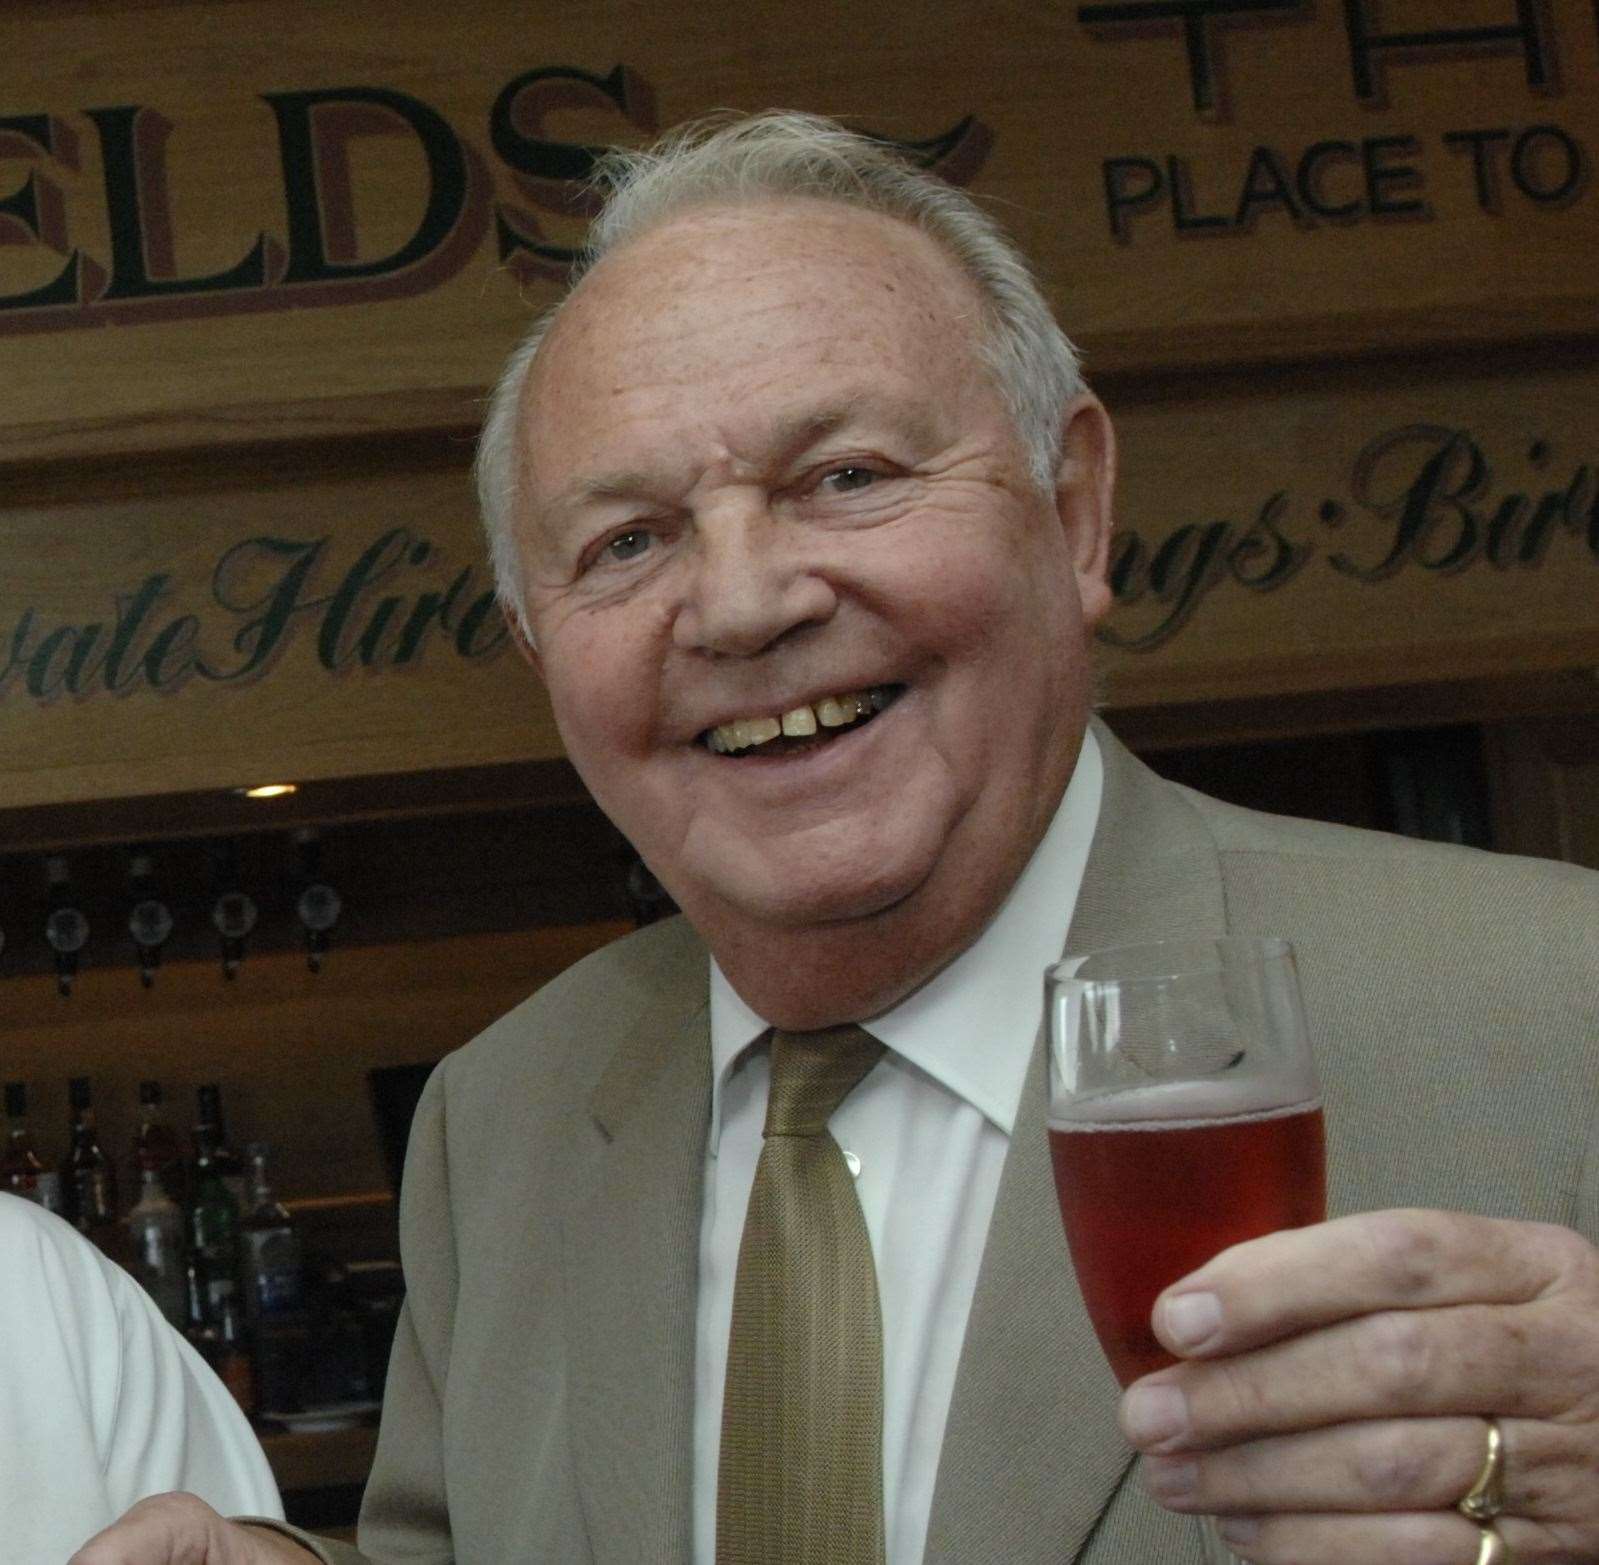 Frank Thorley founded Thorley Taverns in 1971